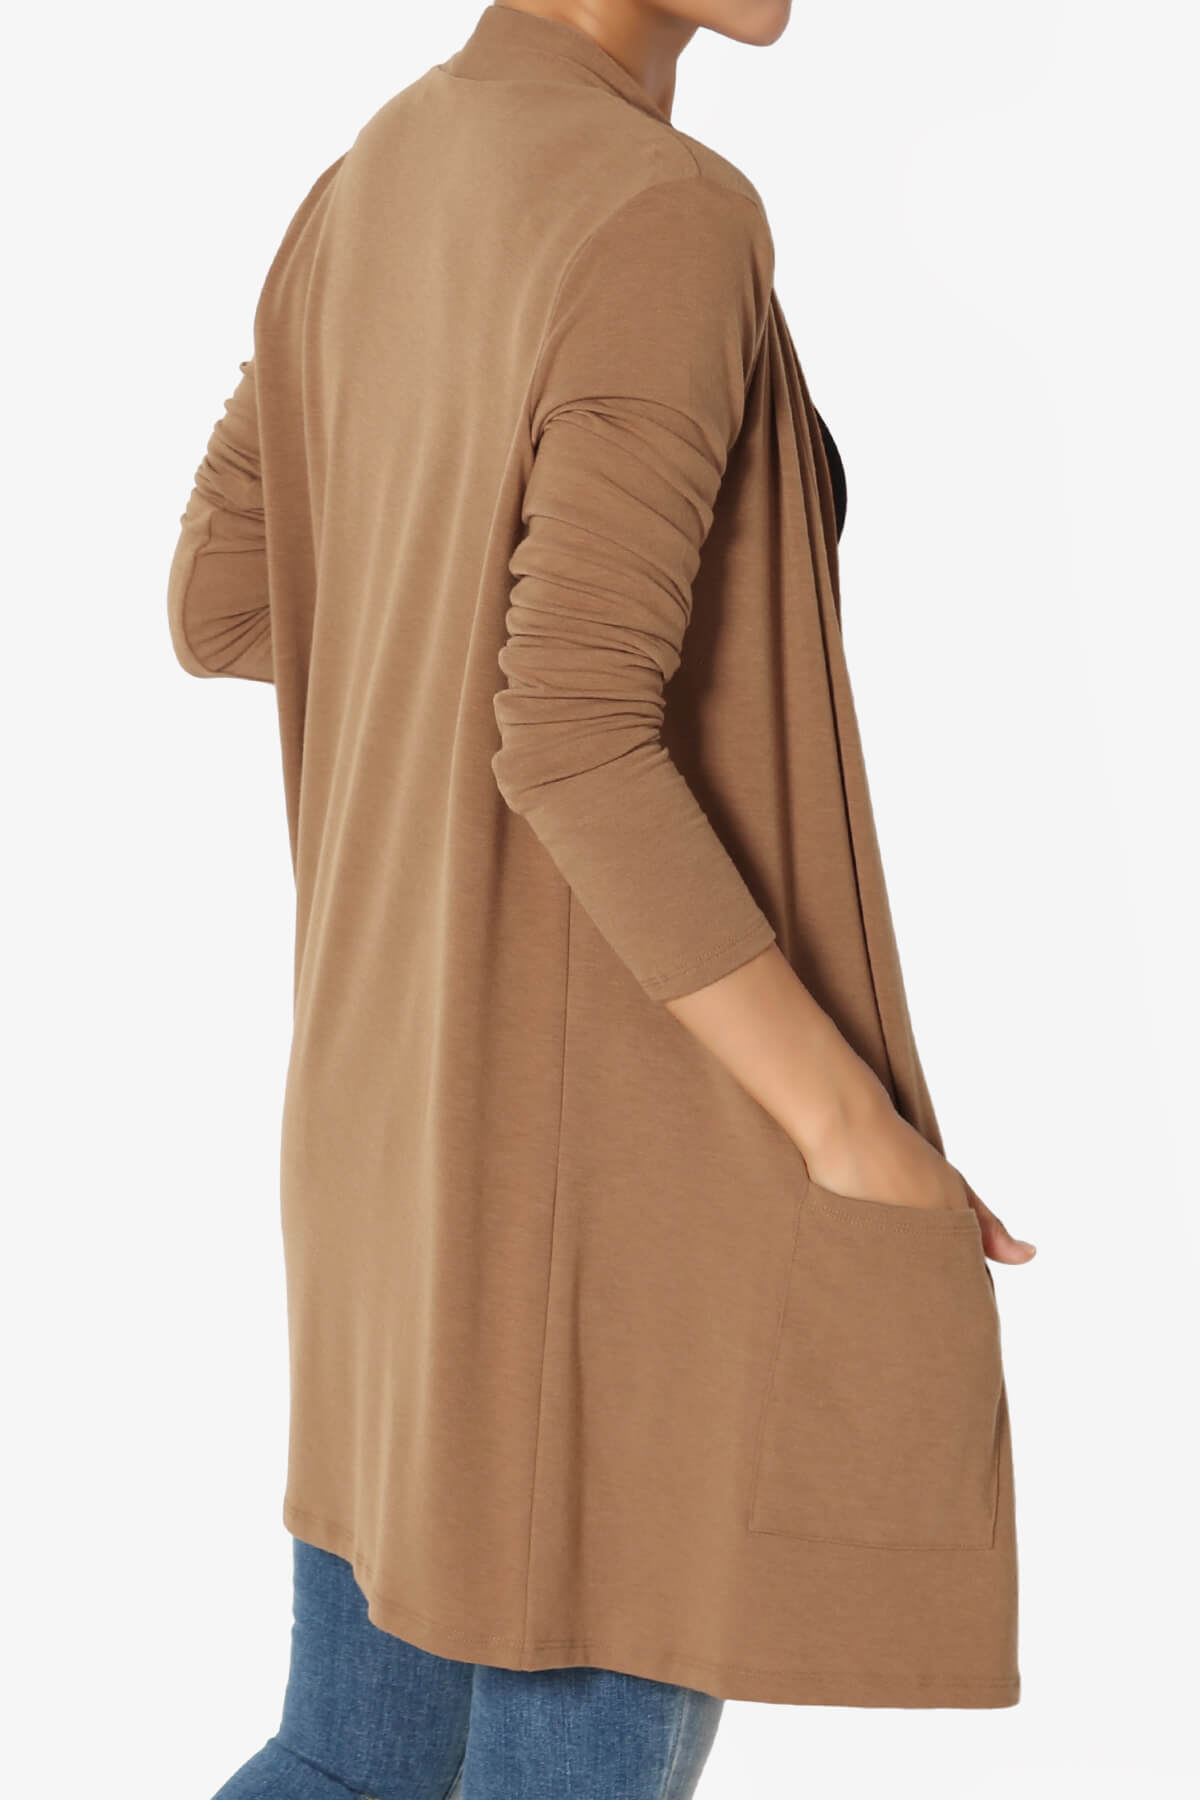 Load image into Gallery viewer, Daday Long Sleeve Pocket Open Front Cardigan DEEP CAMEL_4
